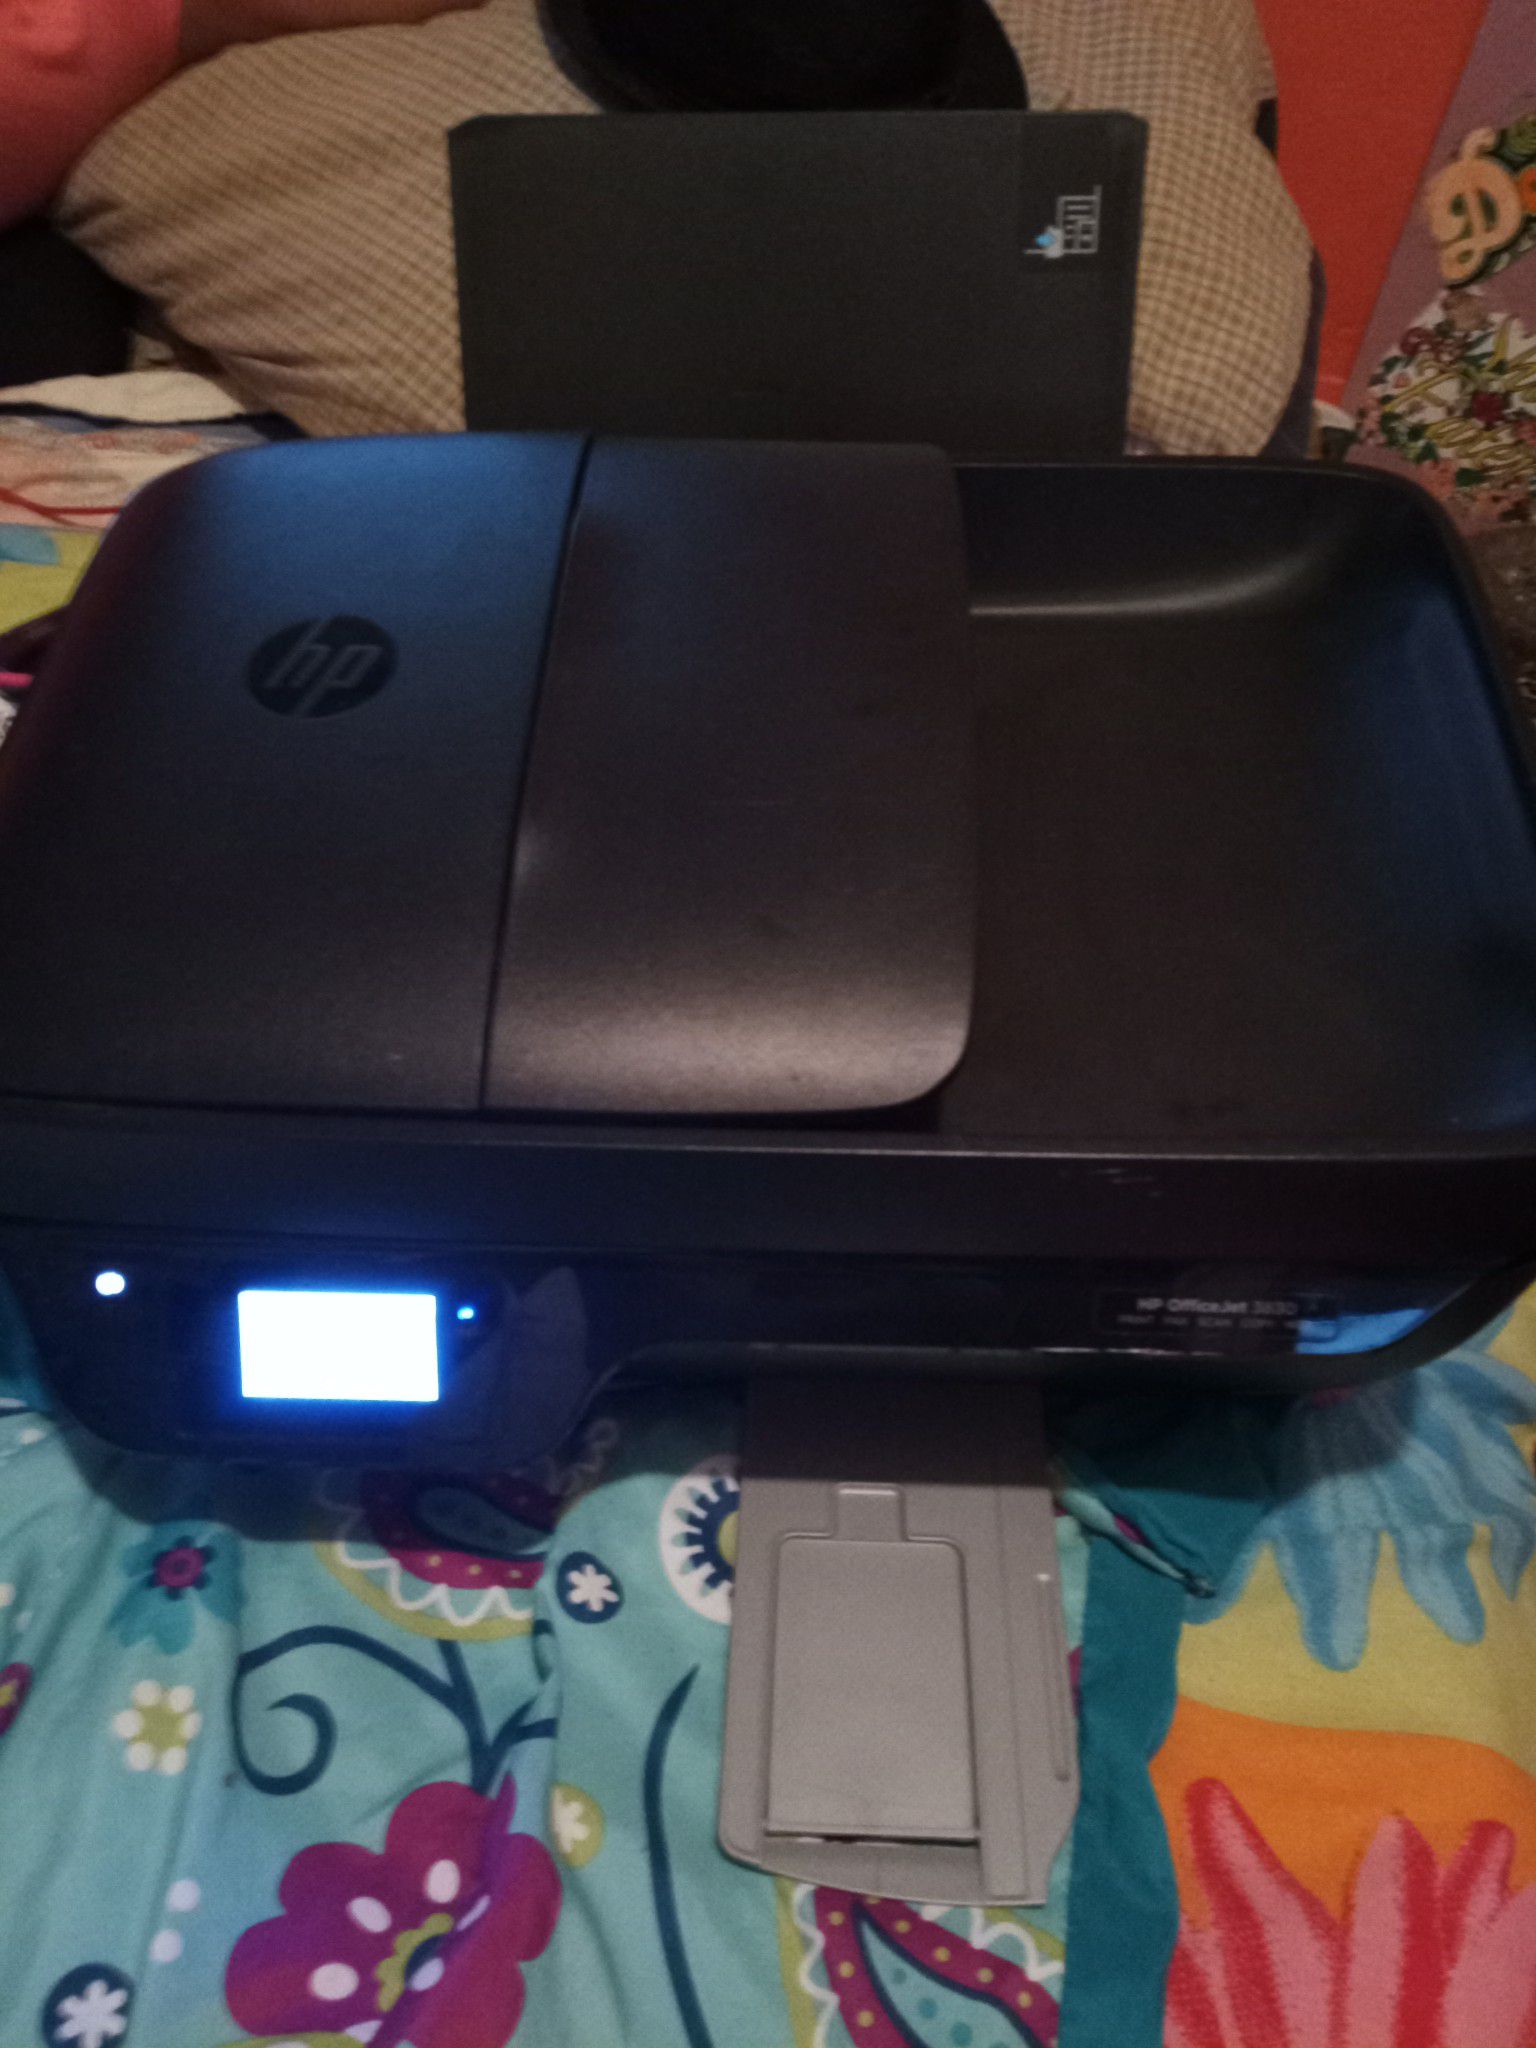 Hp Office Jet all in one 3830 print,scan,fax,copy WiFi and Bluetooth capable...